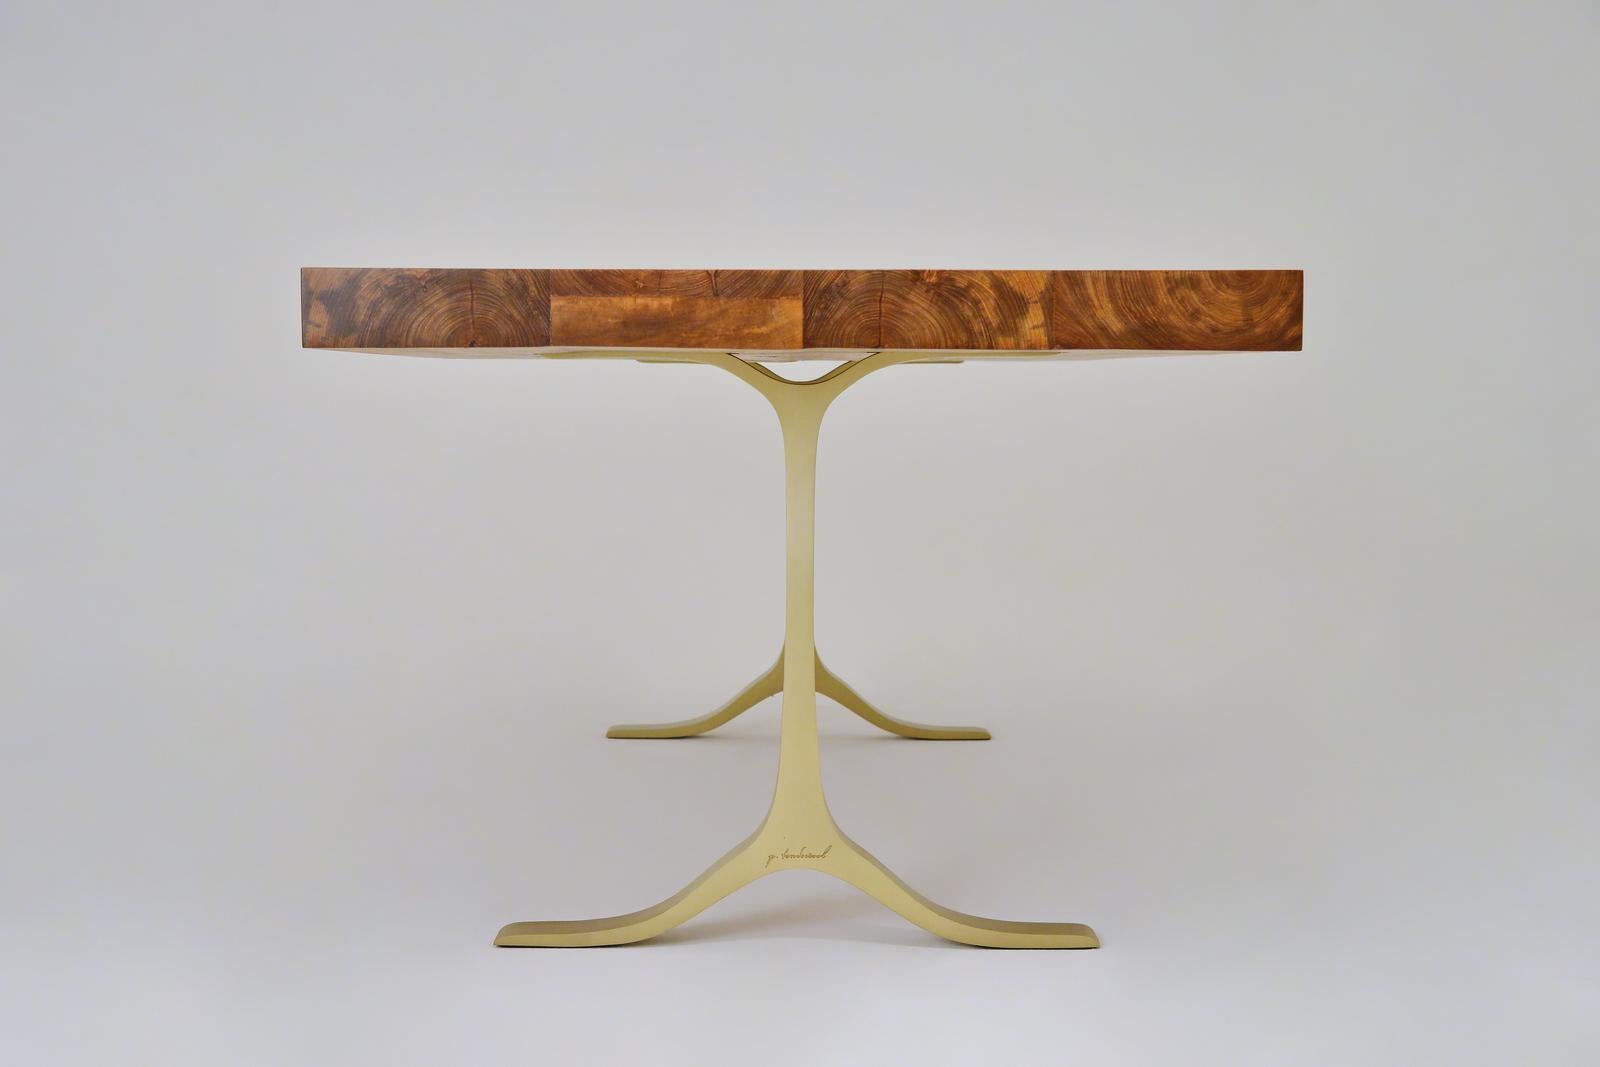 Minimalist Reclaimed Hardwood Table, Sand Cast Brass Base by P. Tendercool For Sale